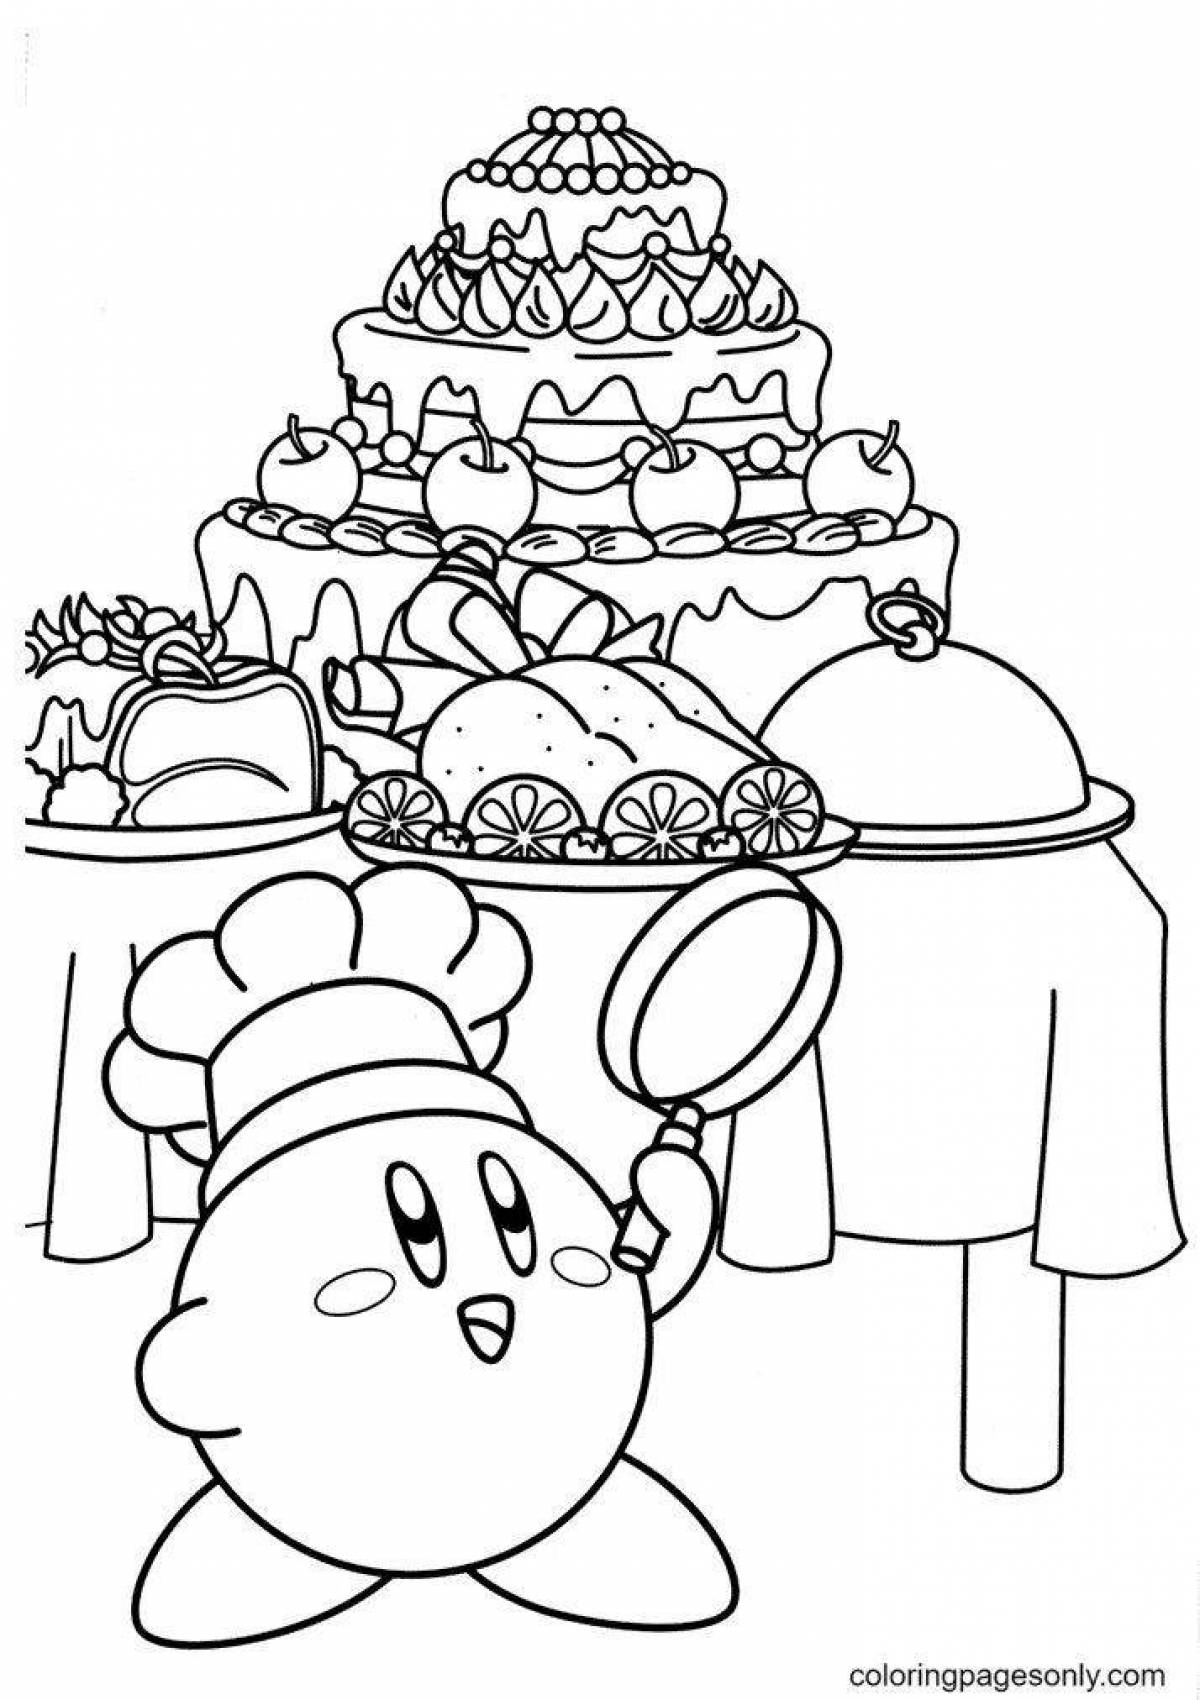 Fearless Kirby Coloring Page